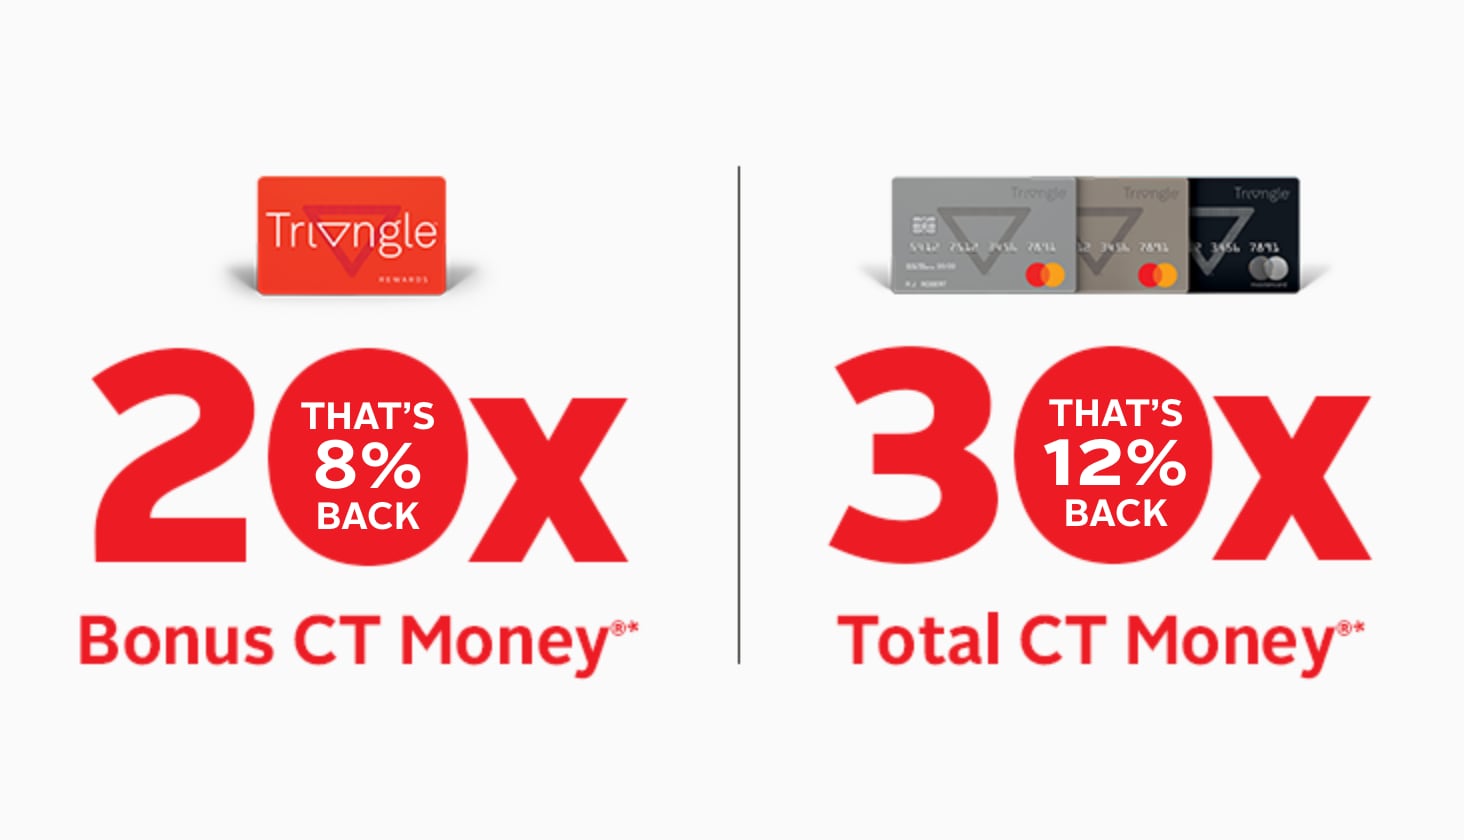 Collect up to 30x CT Money®*